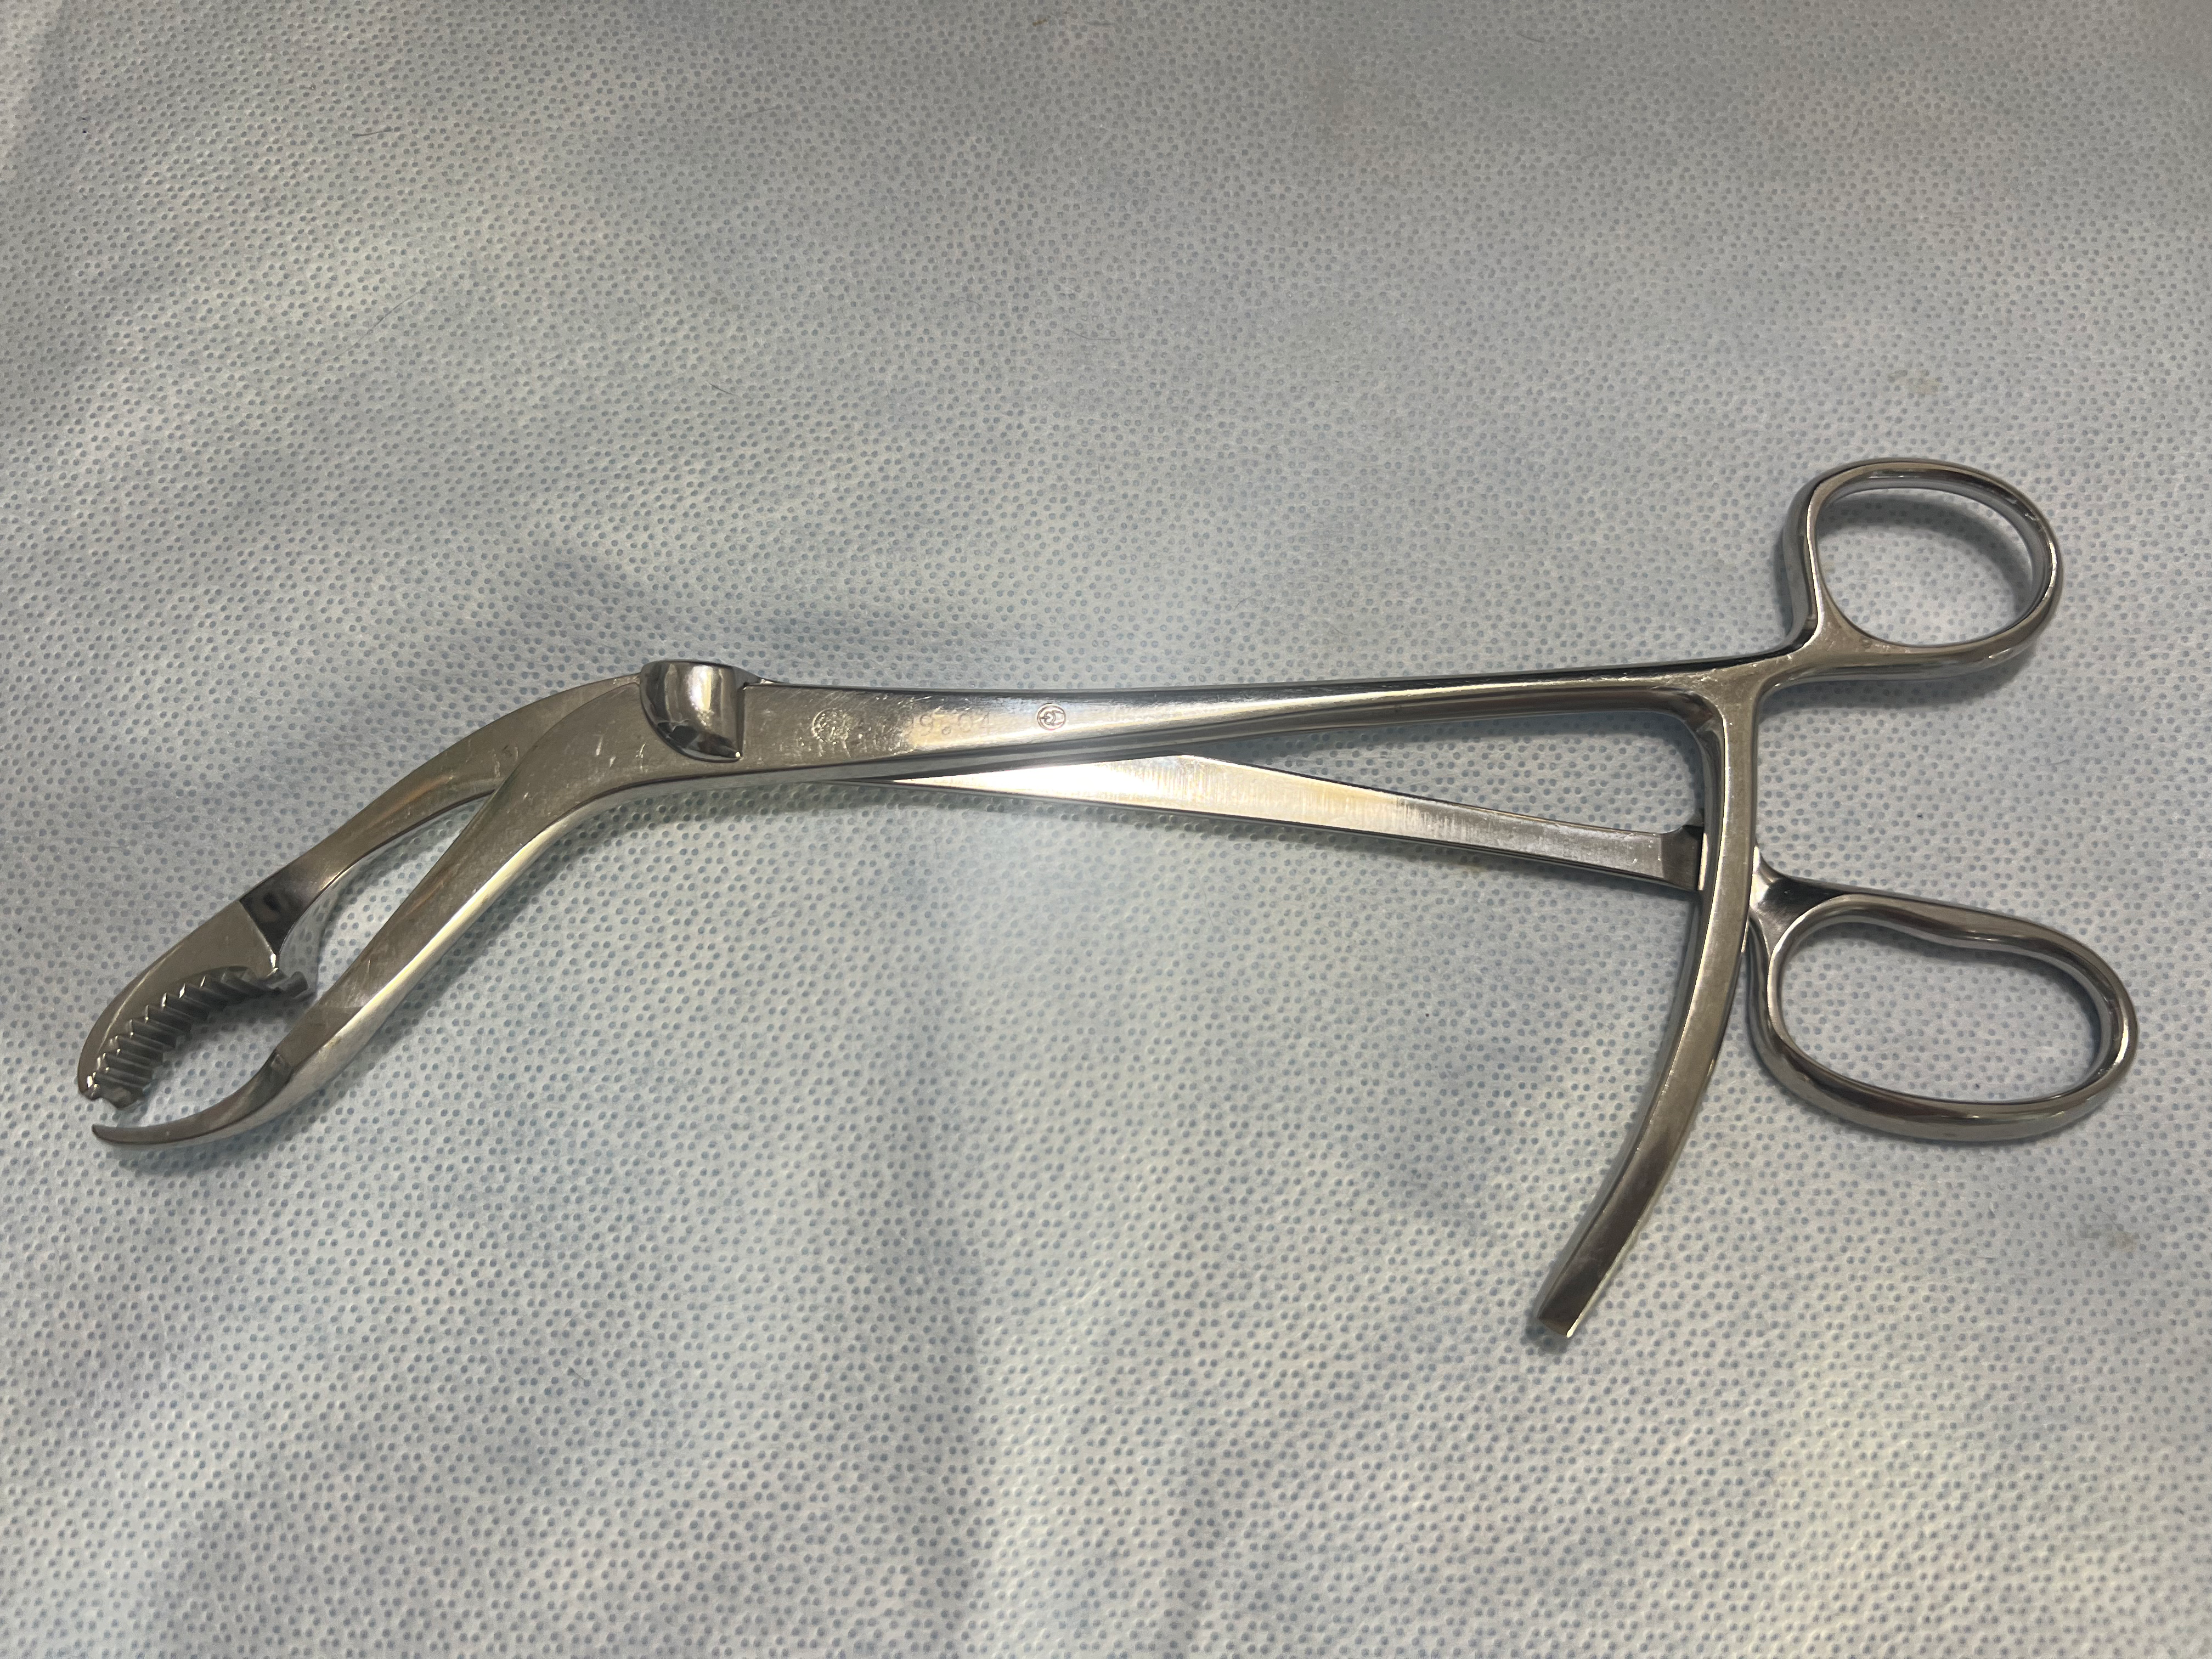 399.04 Reduction Forceps US1185